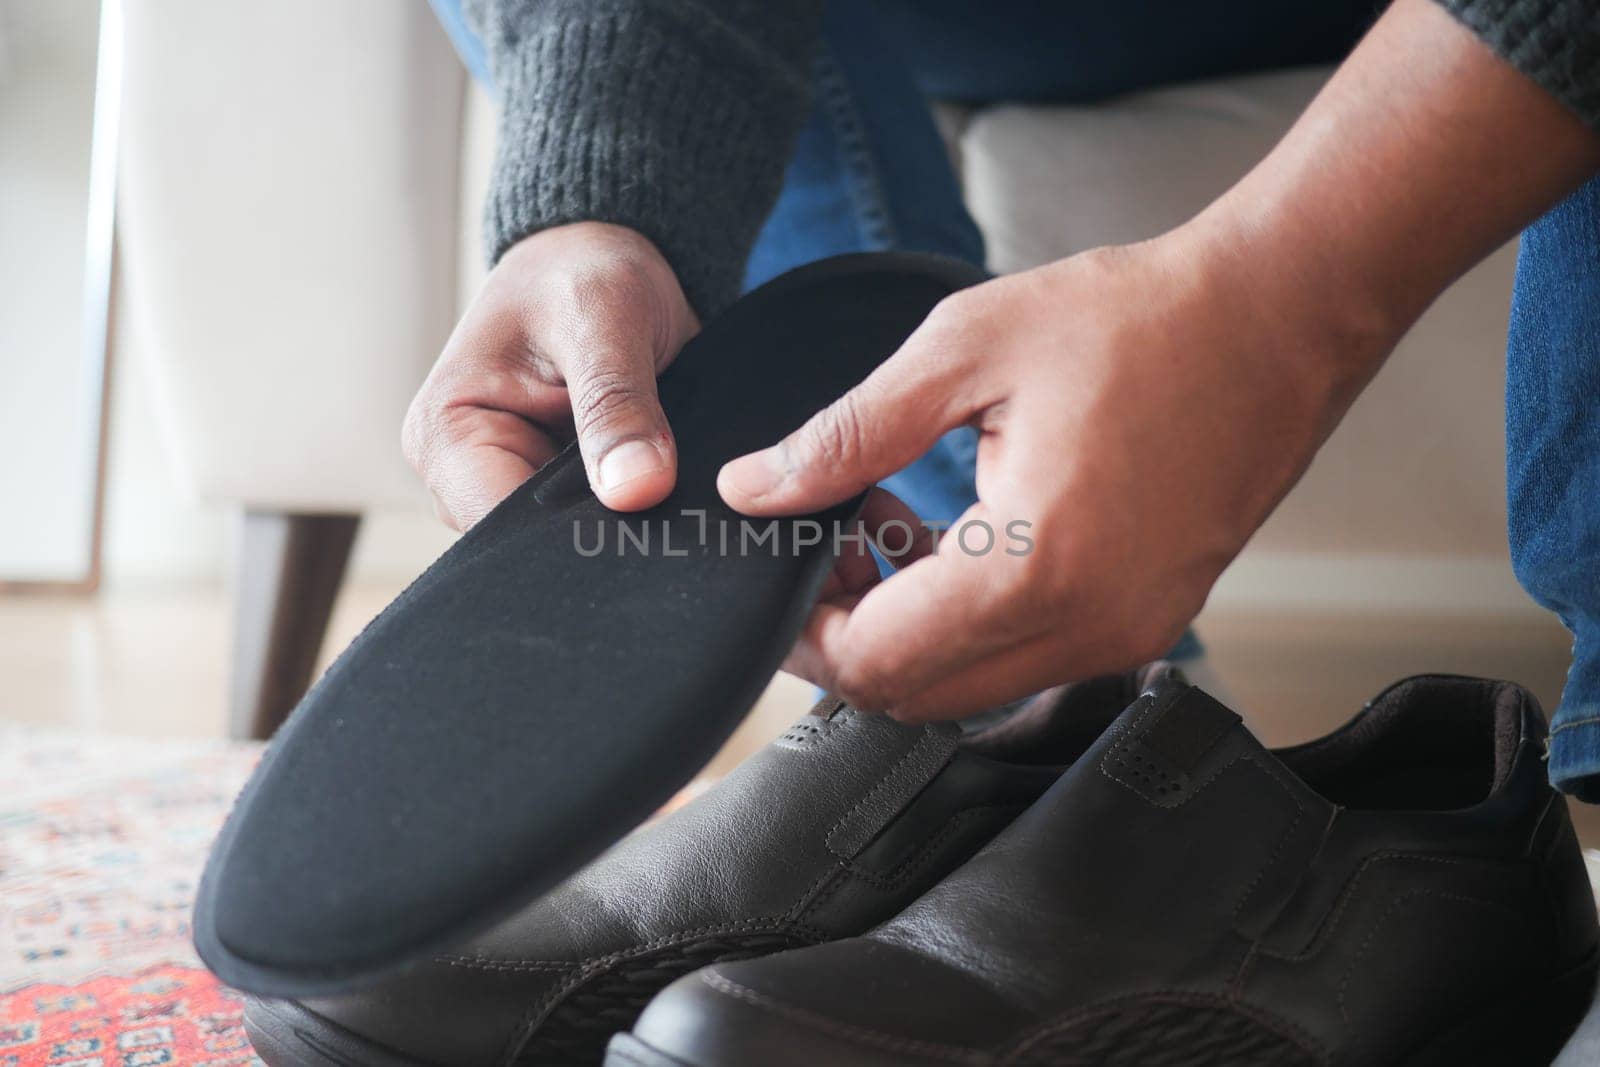 men hand putting Orthopedic insoles in shoes by towfiq007